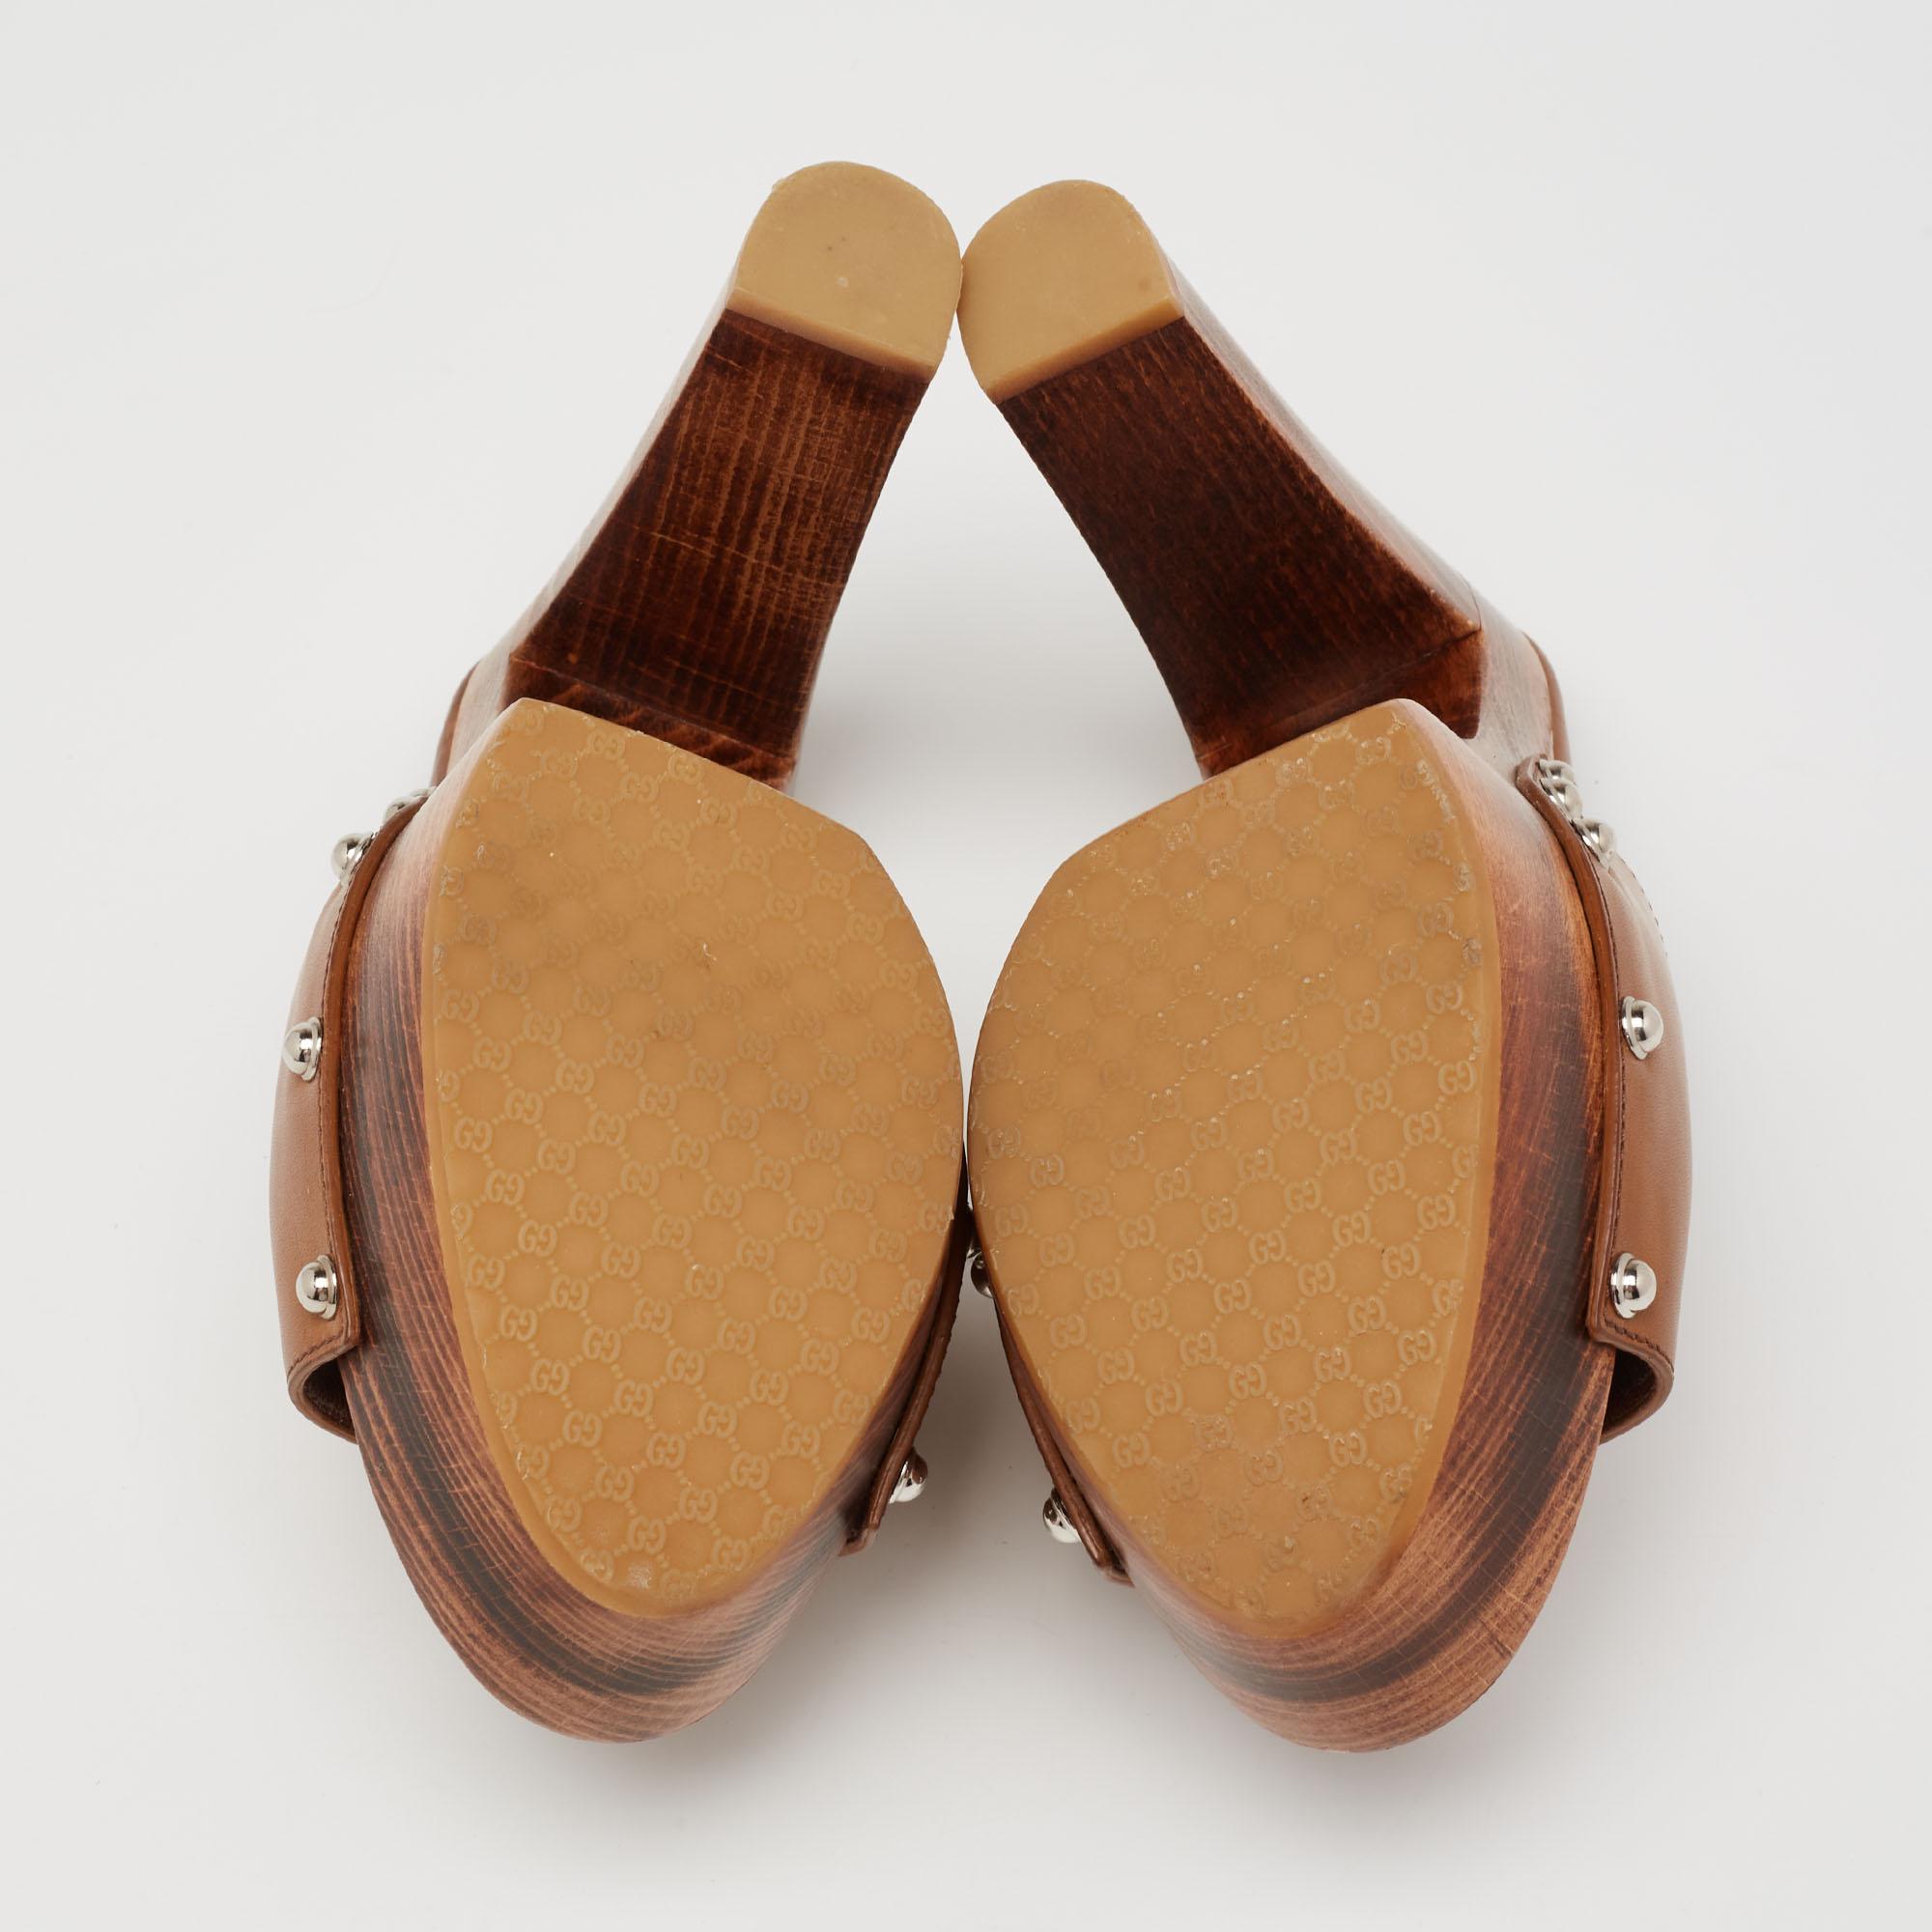 Gucci Brown Leather Horsebit Peep-Toe Wooden Clogs Size 39 2